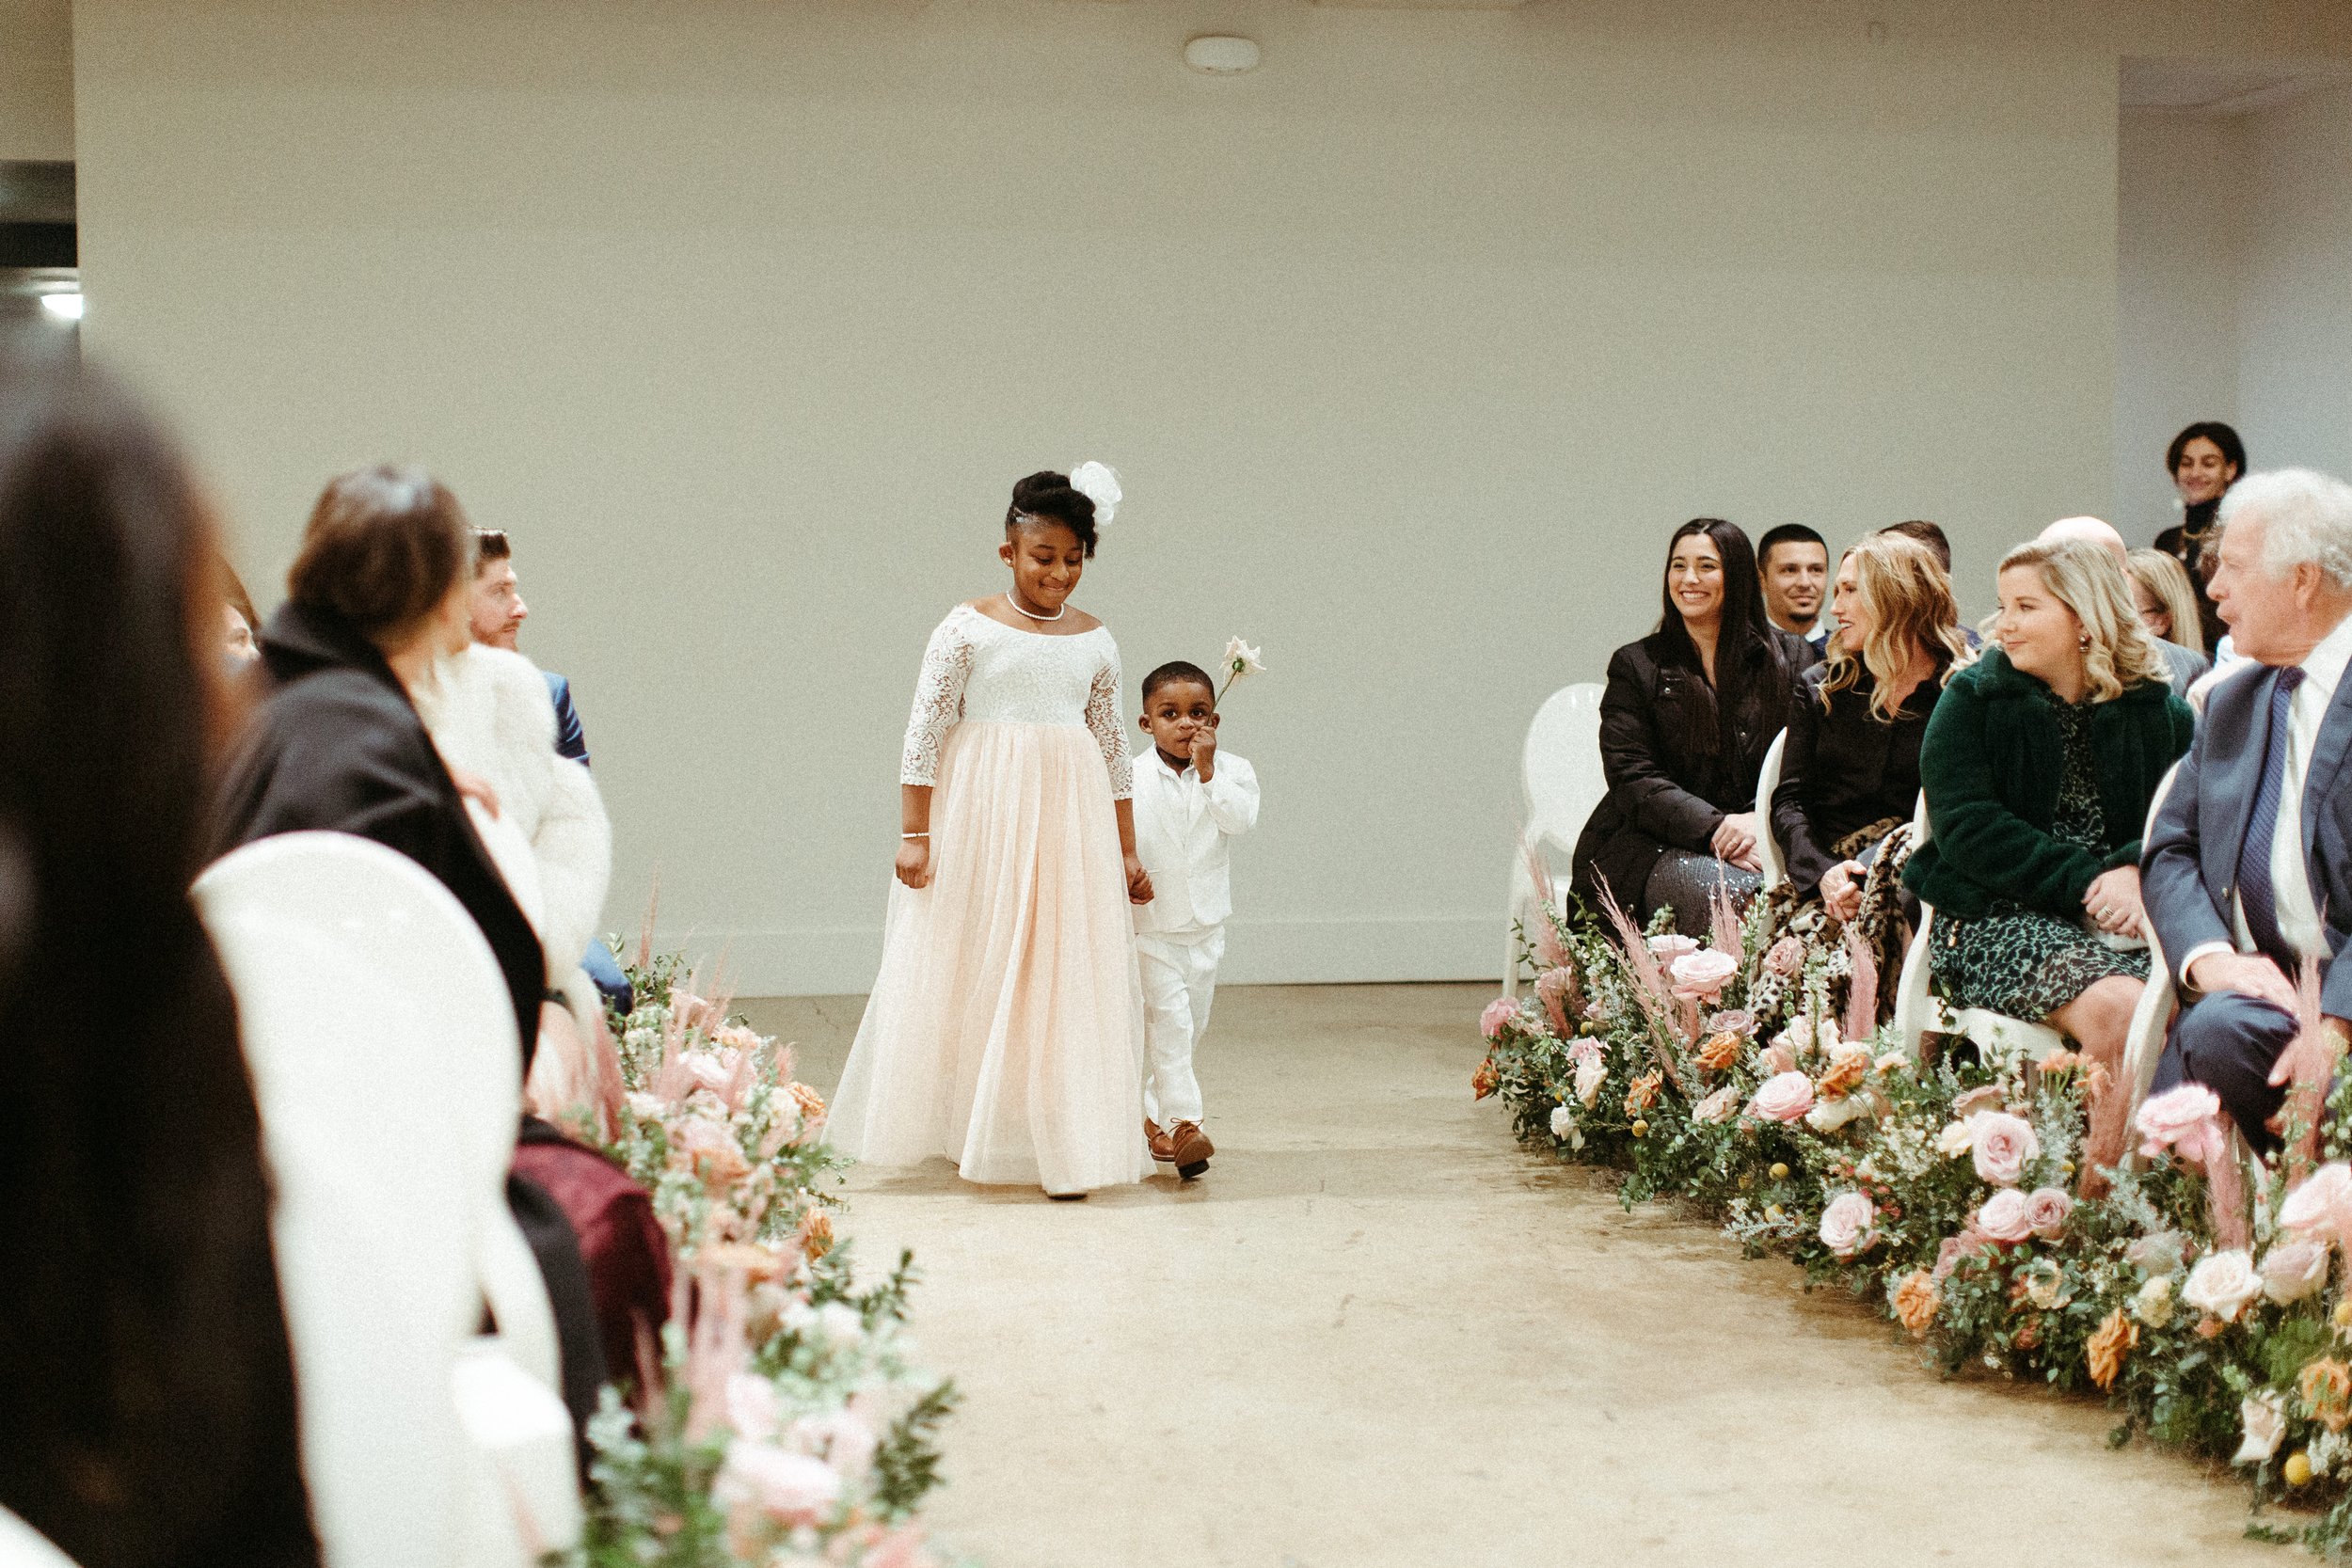 Lush aisle meadows beautifully frame the ceremony of this winter wedding with hues of dusty pink, terra cotta, cream, and sage green. Complete with petal heavy roses and pink pampas grass. Designed by Rosemary and Finch in Nashville, TN.